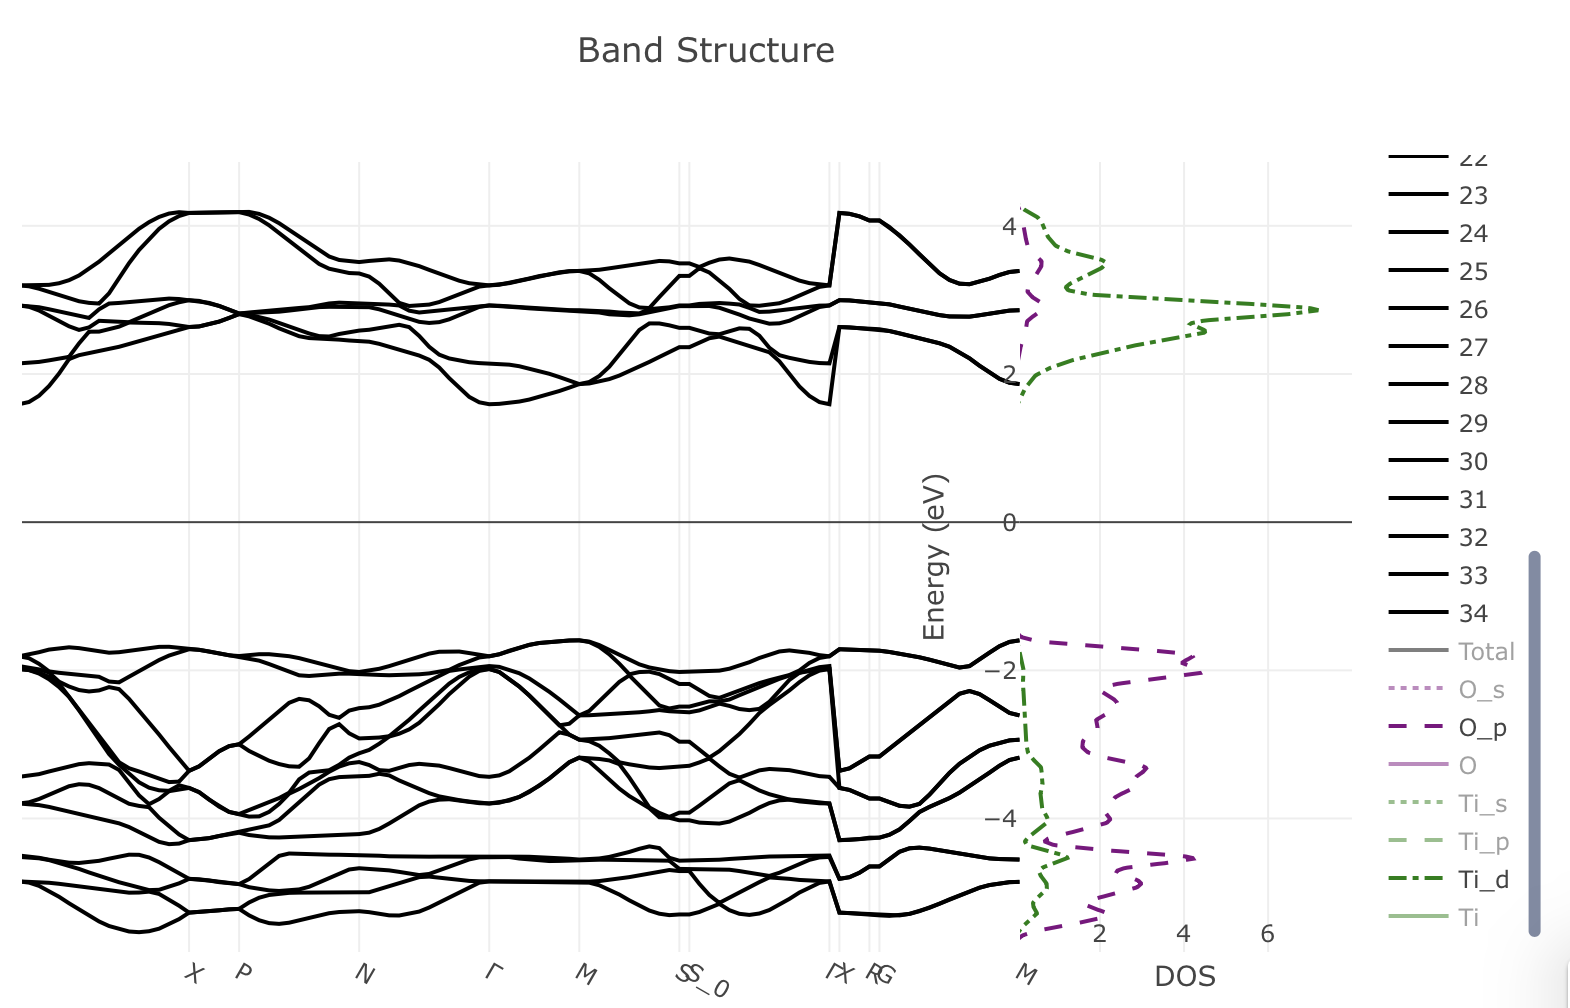 Detailed view of the band structure and PDOS